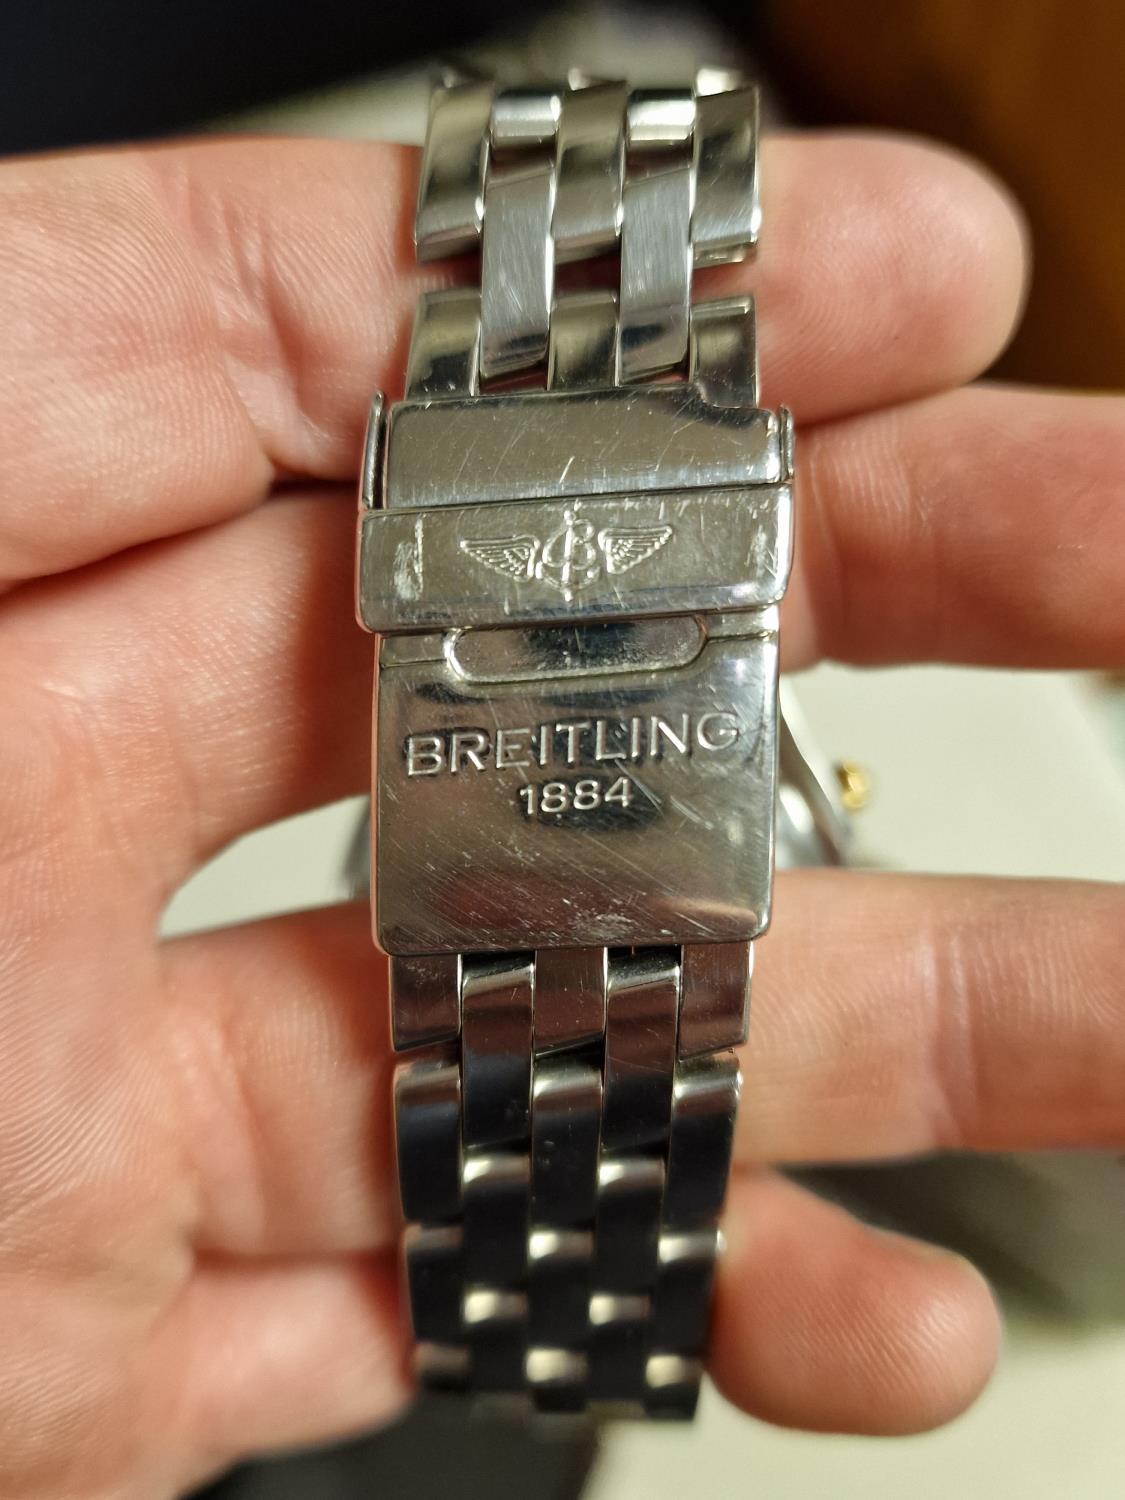 Boxed Breitling Designer Wrist Watch - Image 4 of 5